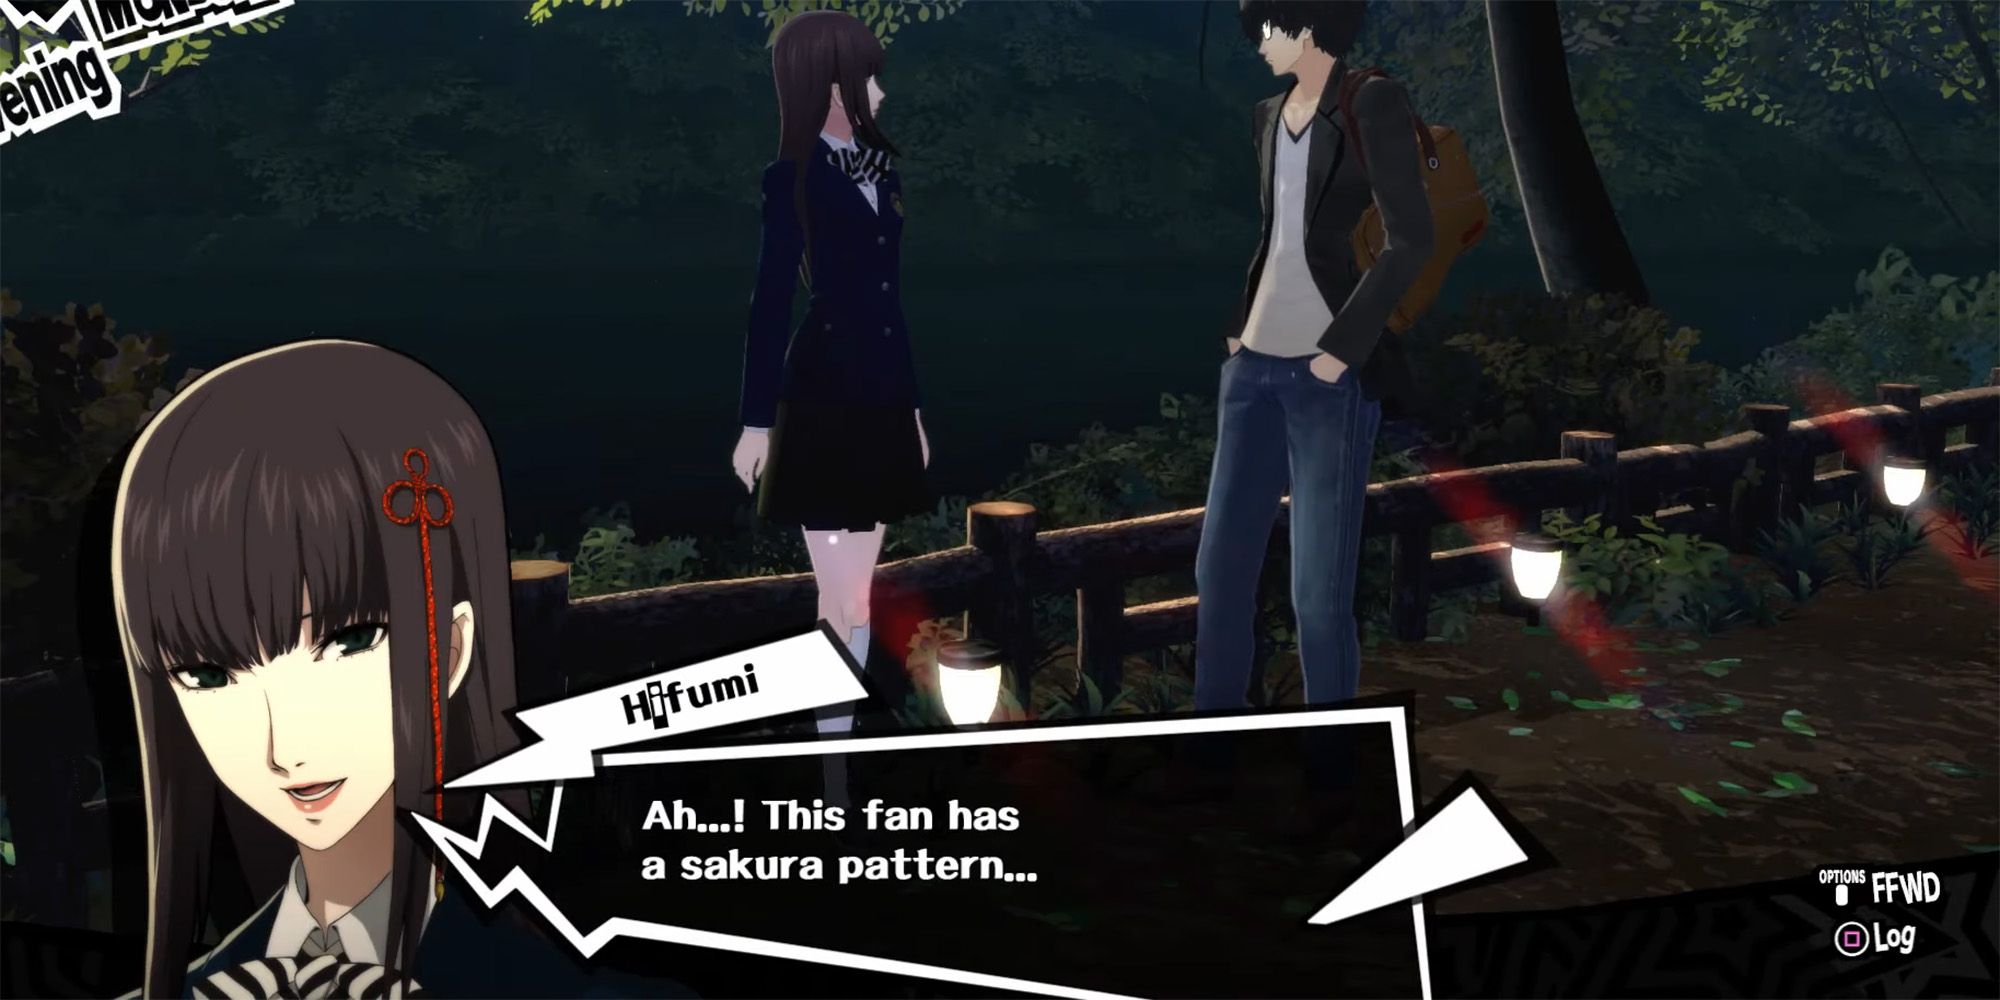 The Ultimate Guide: Unwrapping Hifumi's Top 13 Gifts in Persona 5 Royal